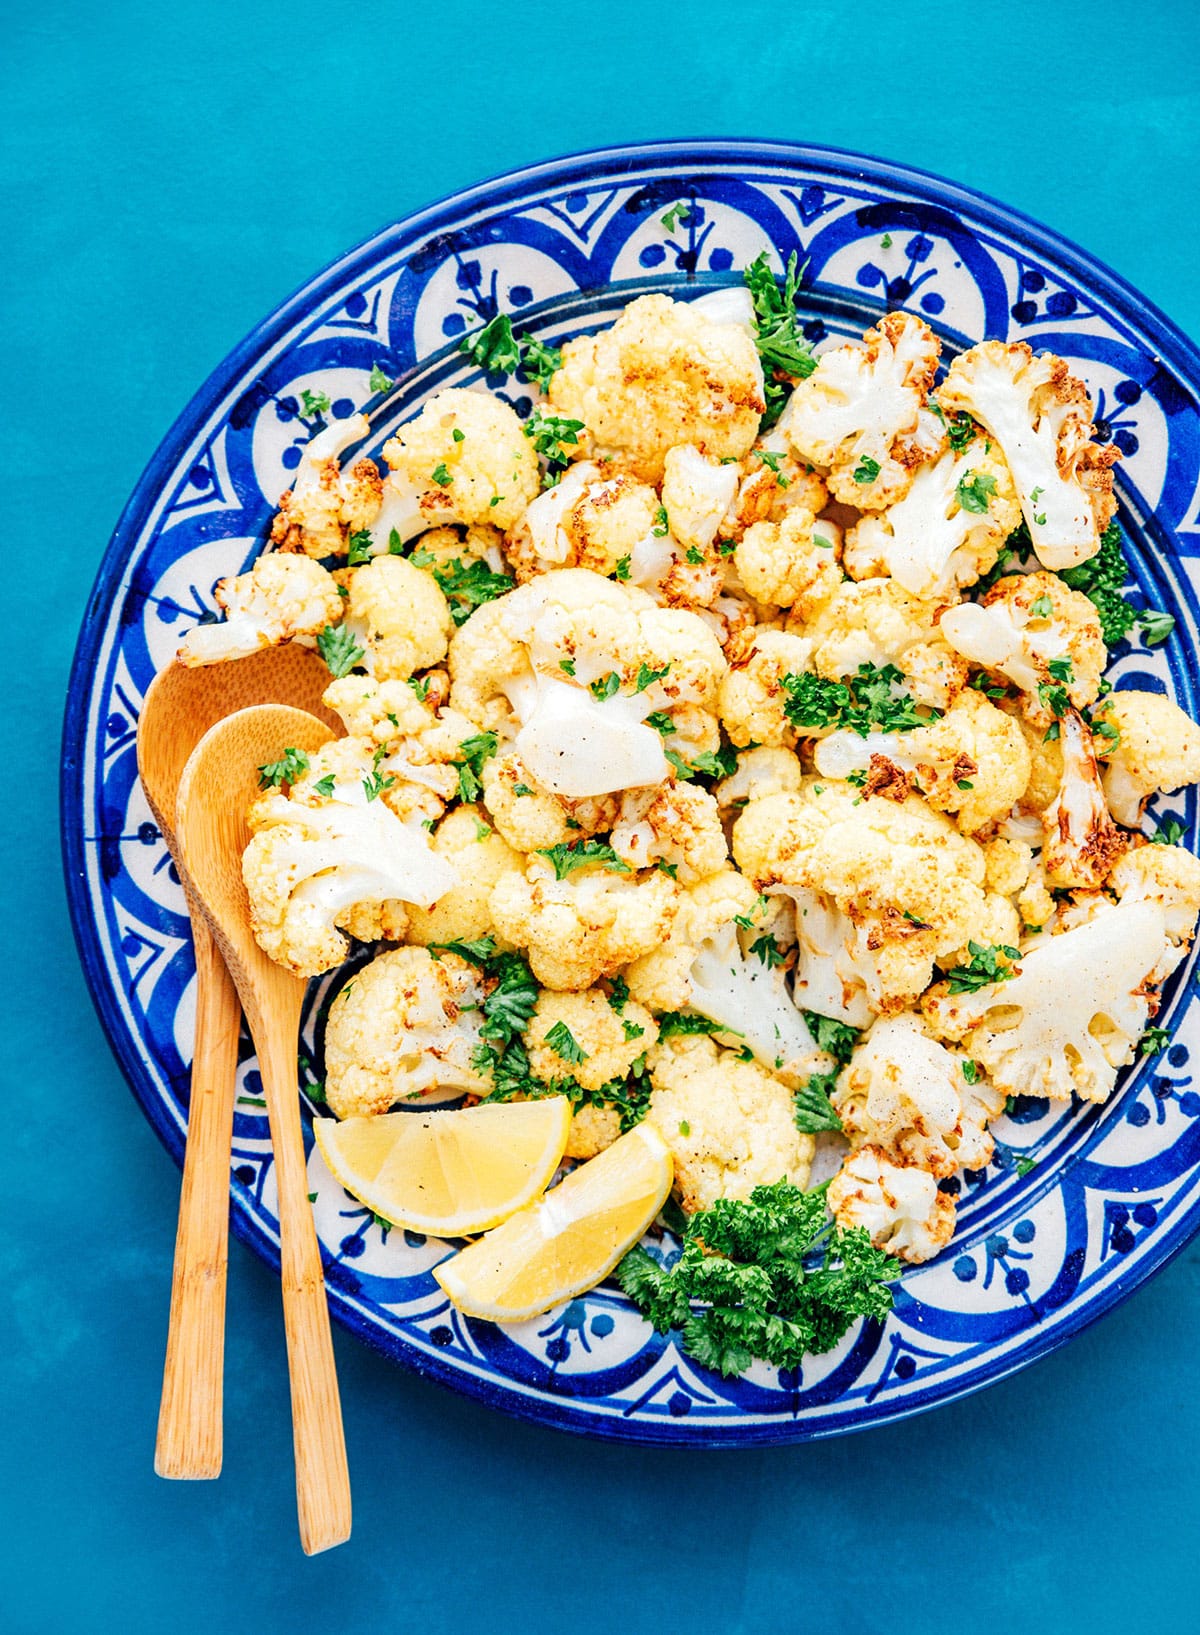 Air fryer cauliflower on a blue plate with wooden spoons.